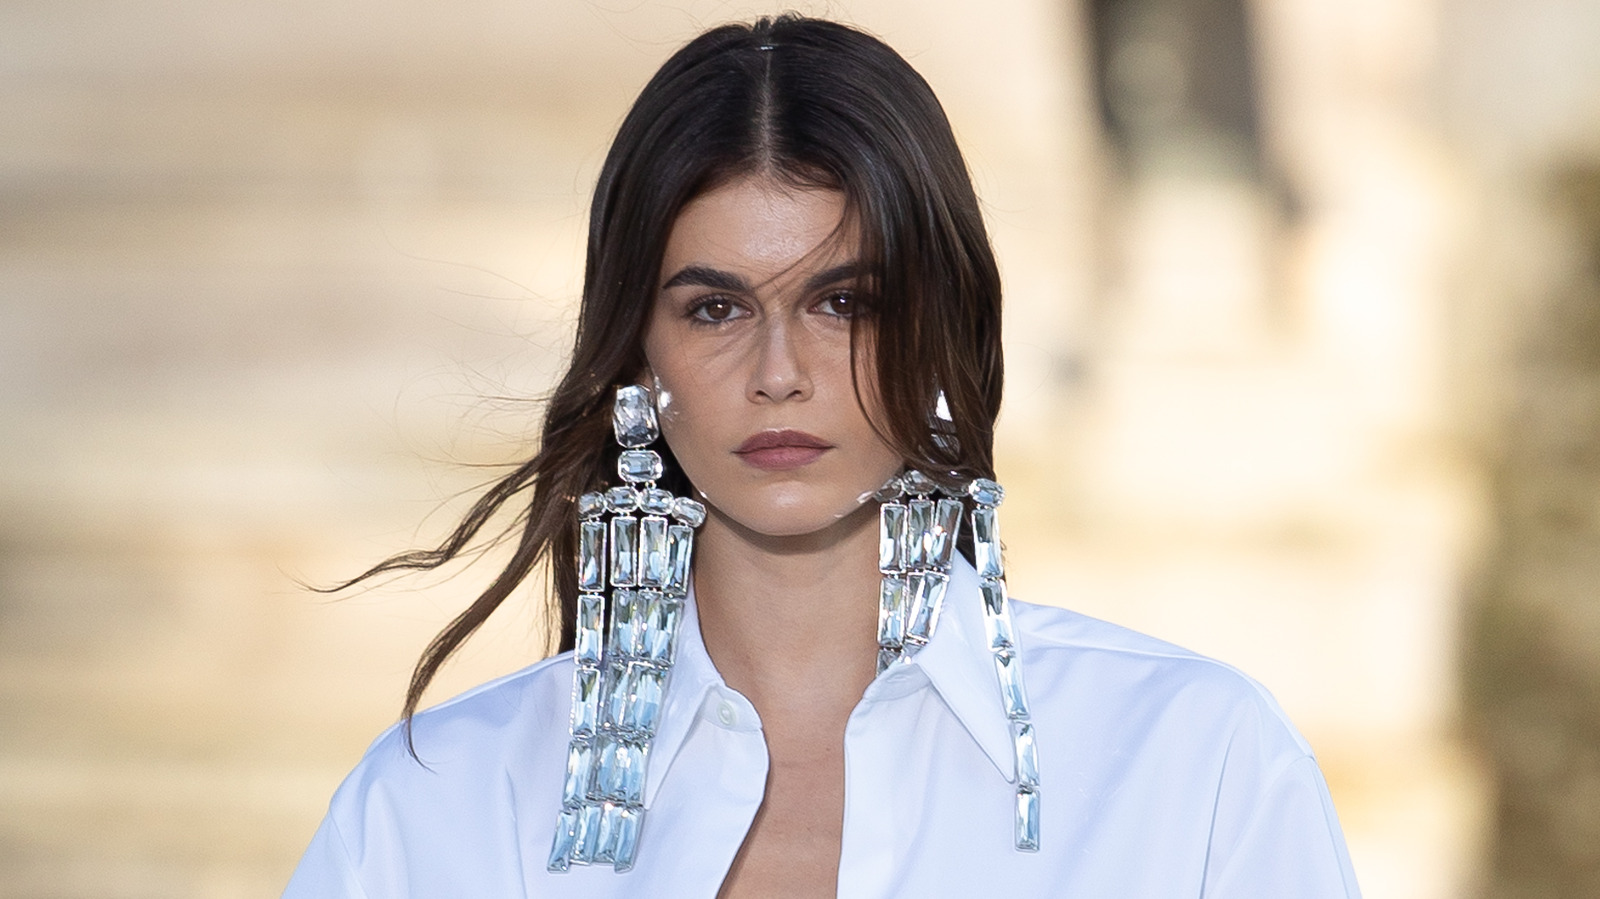 Kaia Gerber, Cindy Crawford's Model Daughter, Is Bringing the Fashion World  To Its Knees